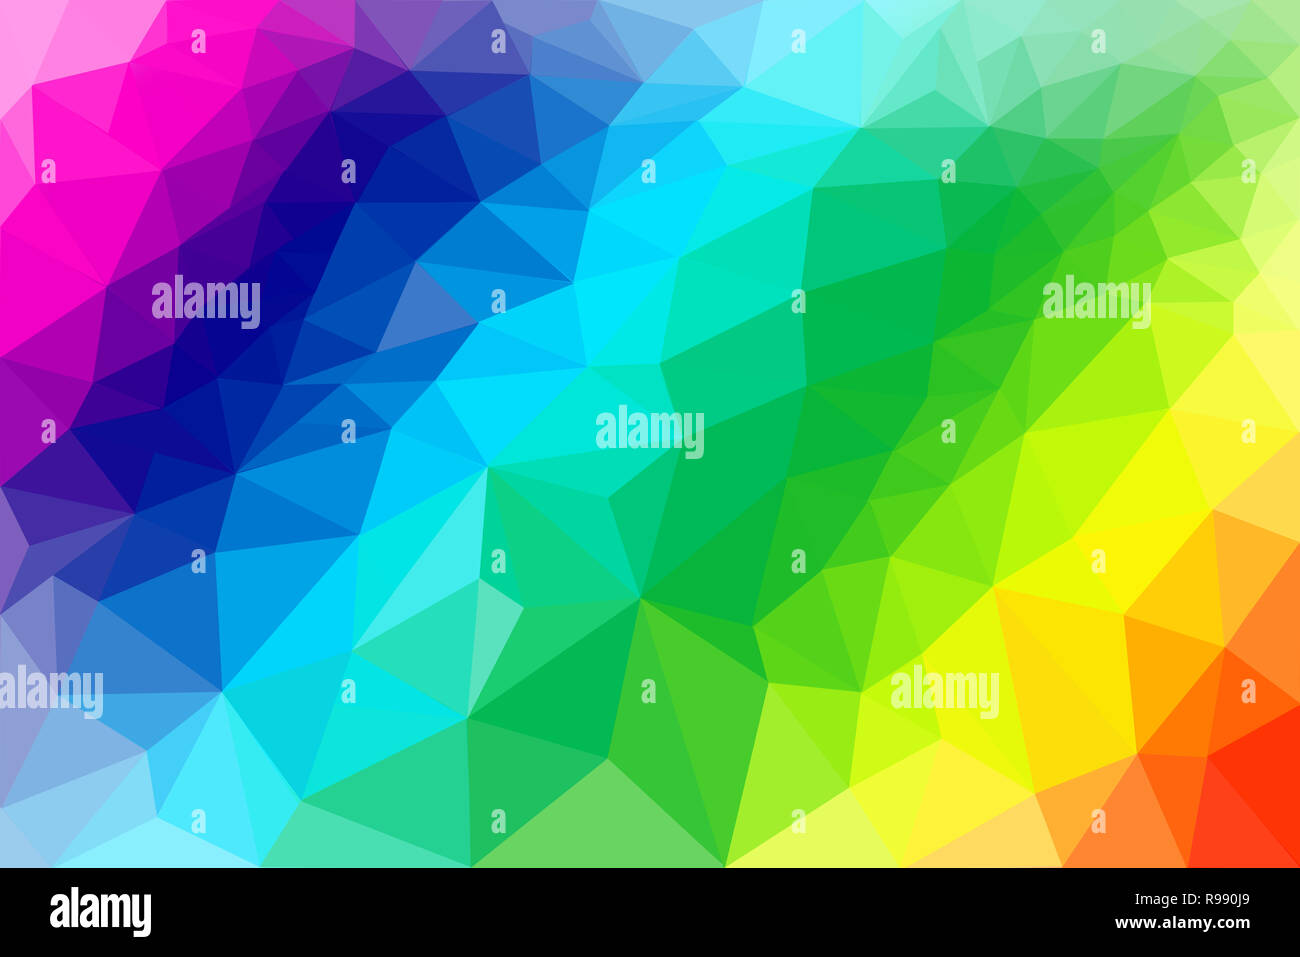 Low Poly abstract background illustration rainbow colours Stock Photo